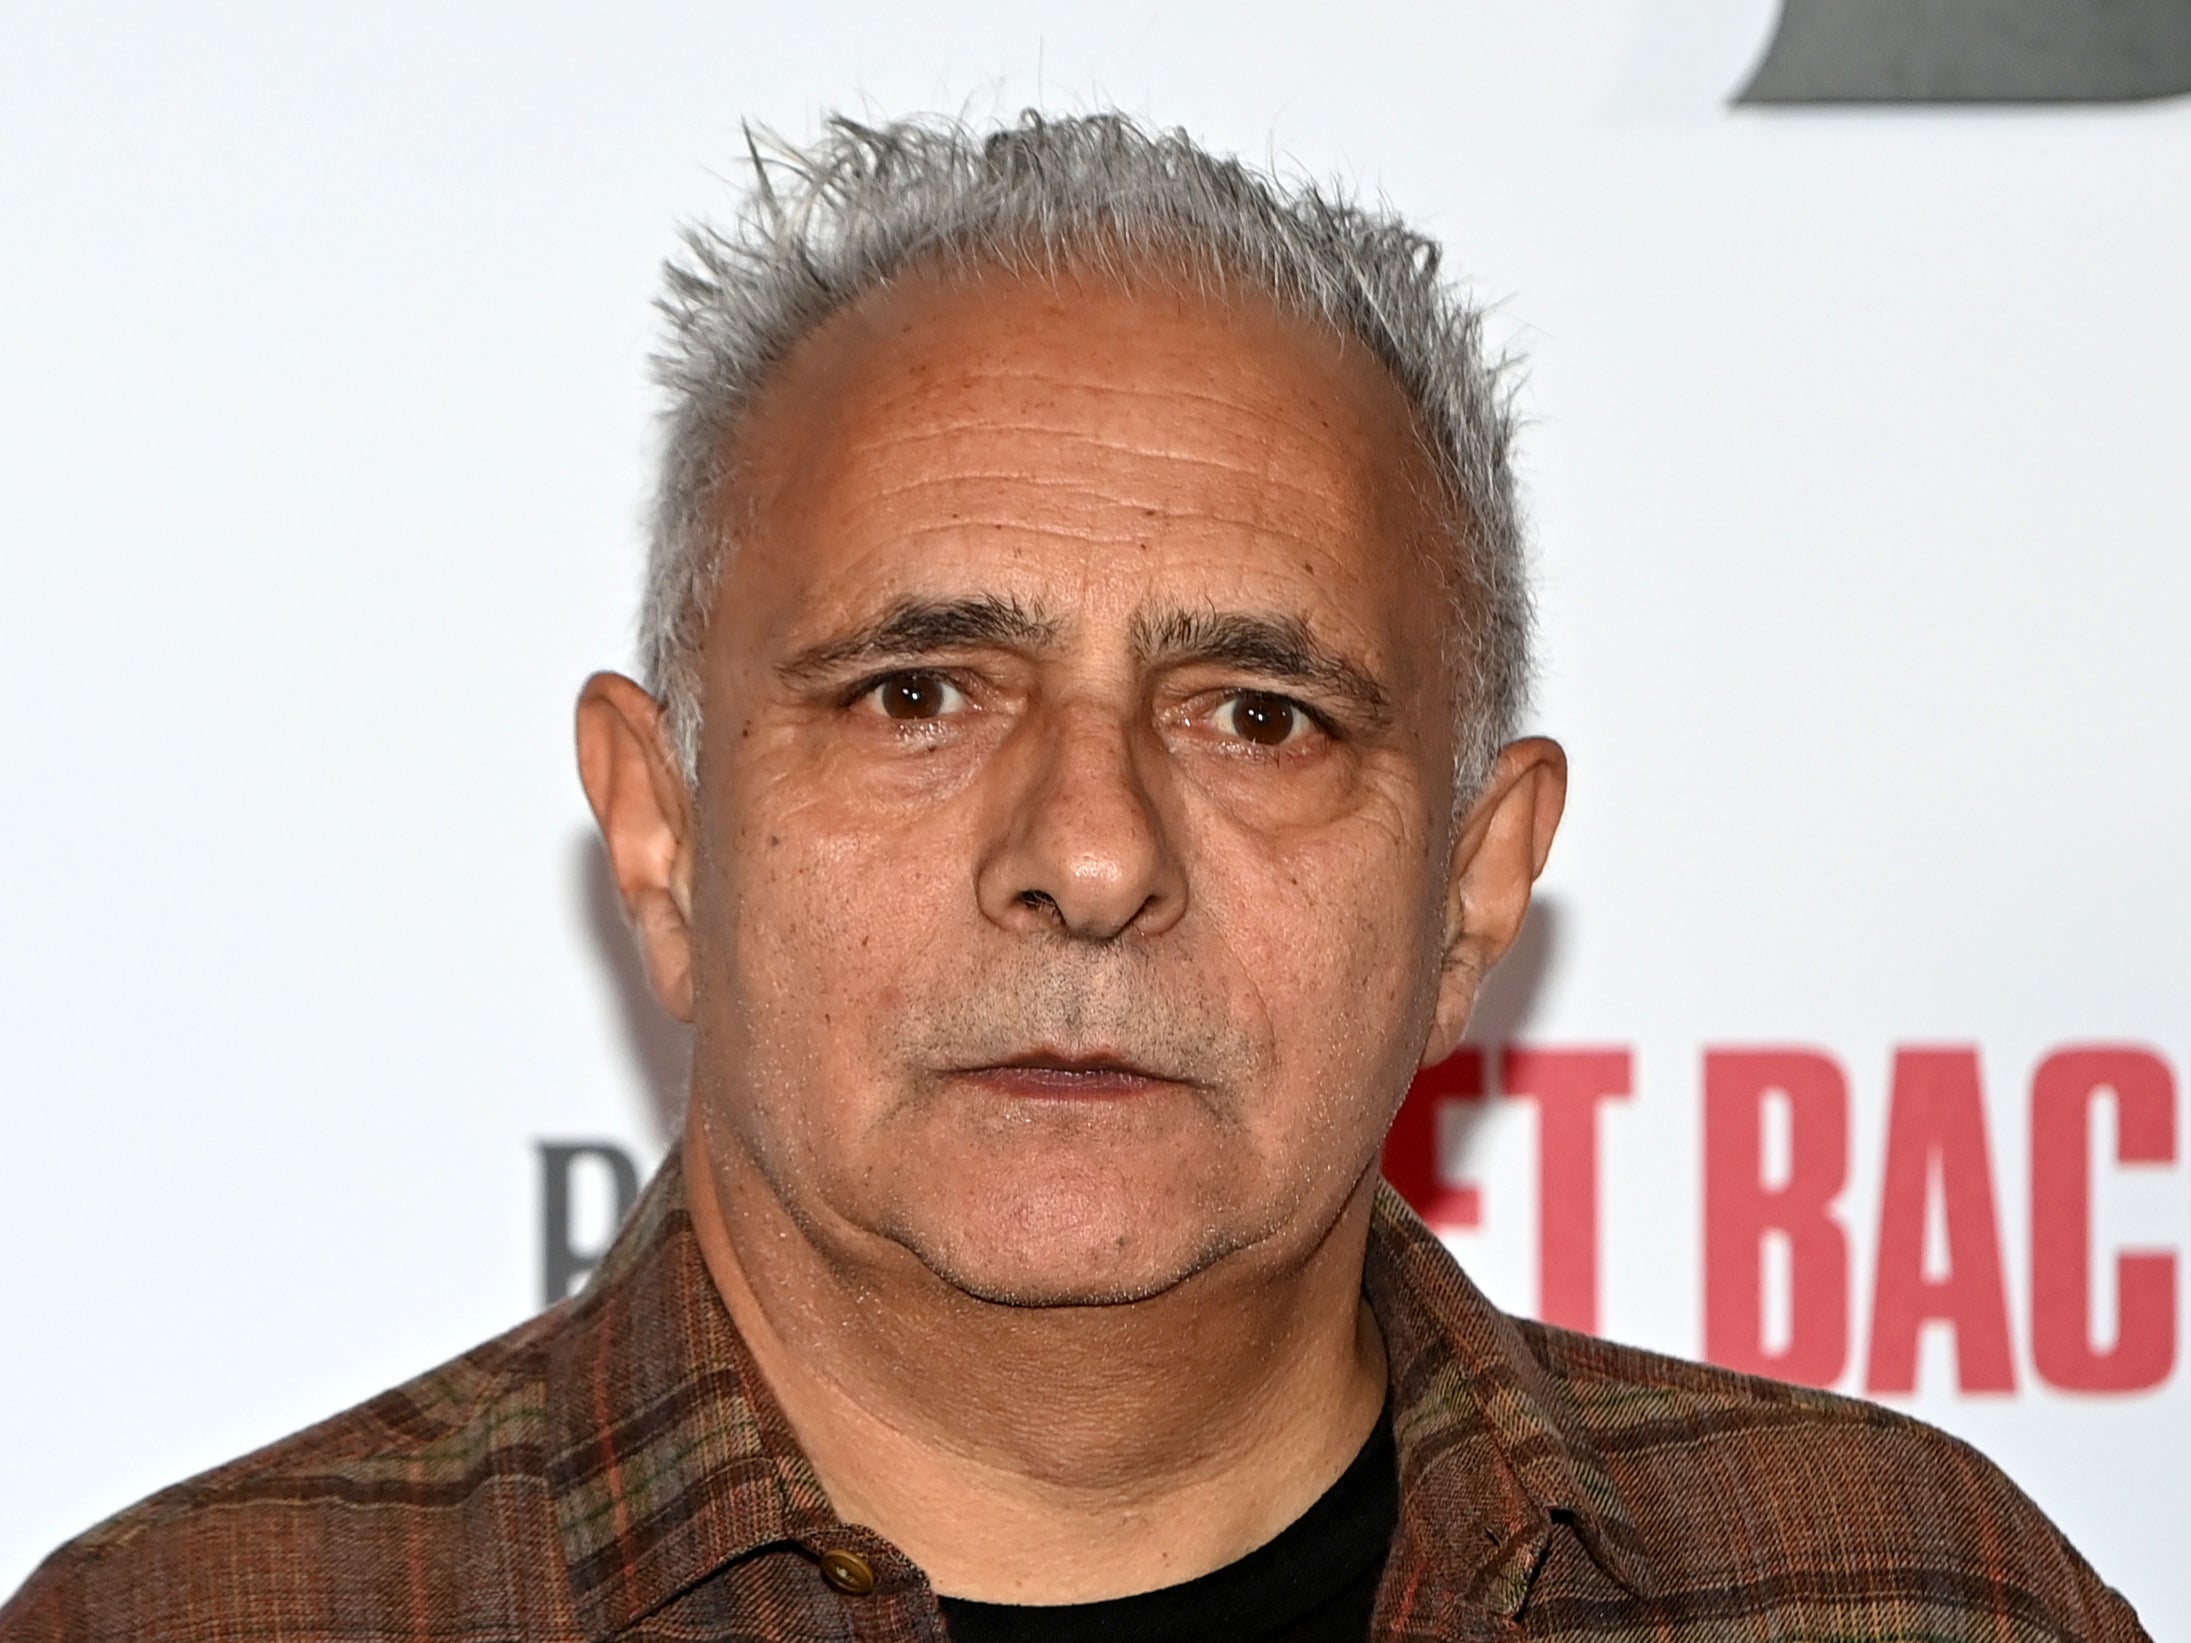 Hanif Kureishi pictured at the UK premiere of ‘The Beatles: Get Back’ on 16 November 2021